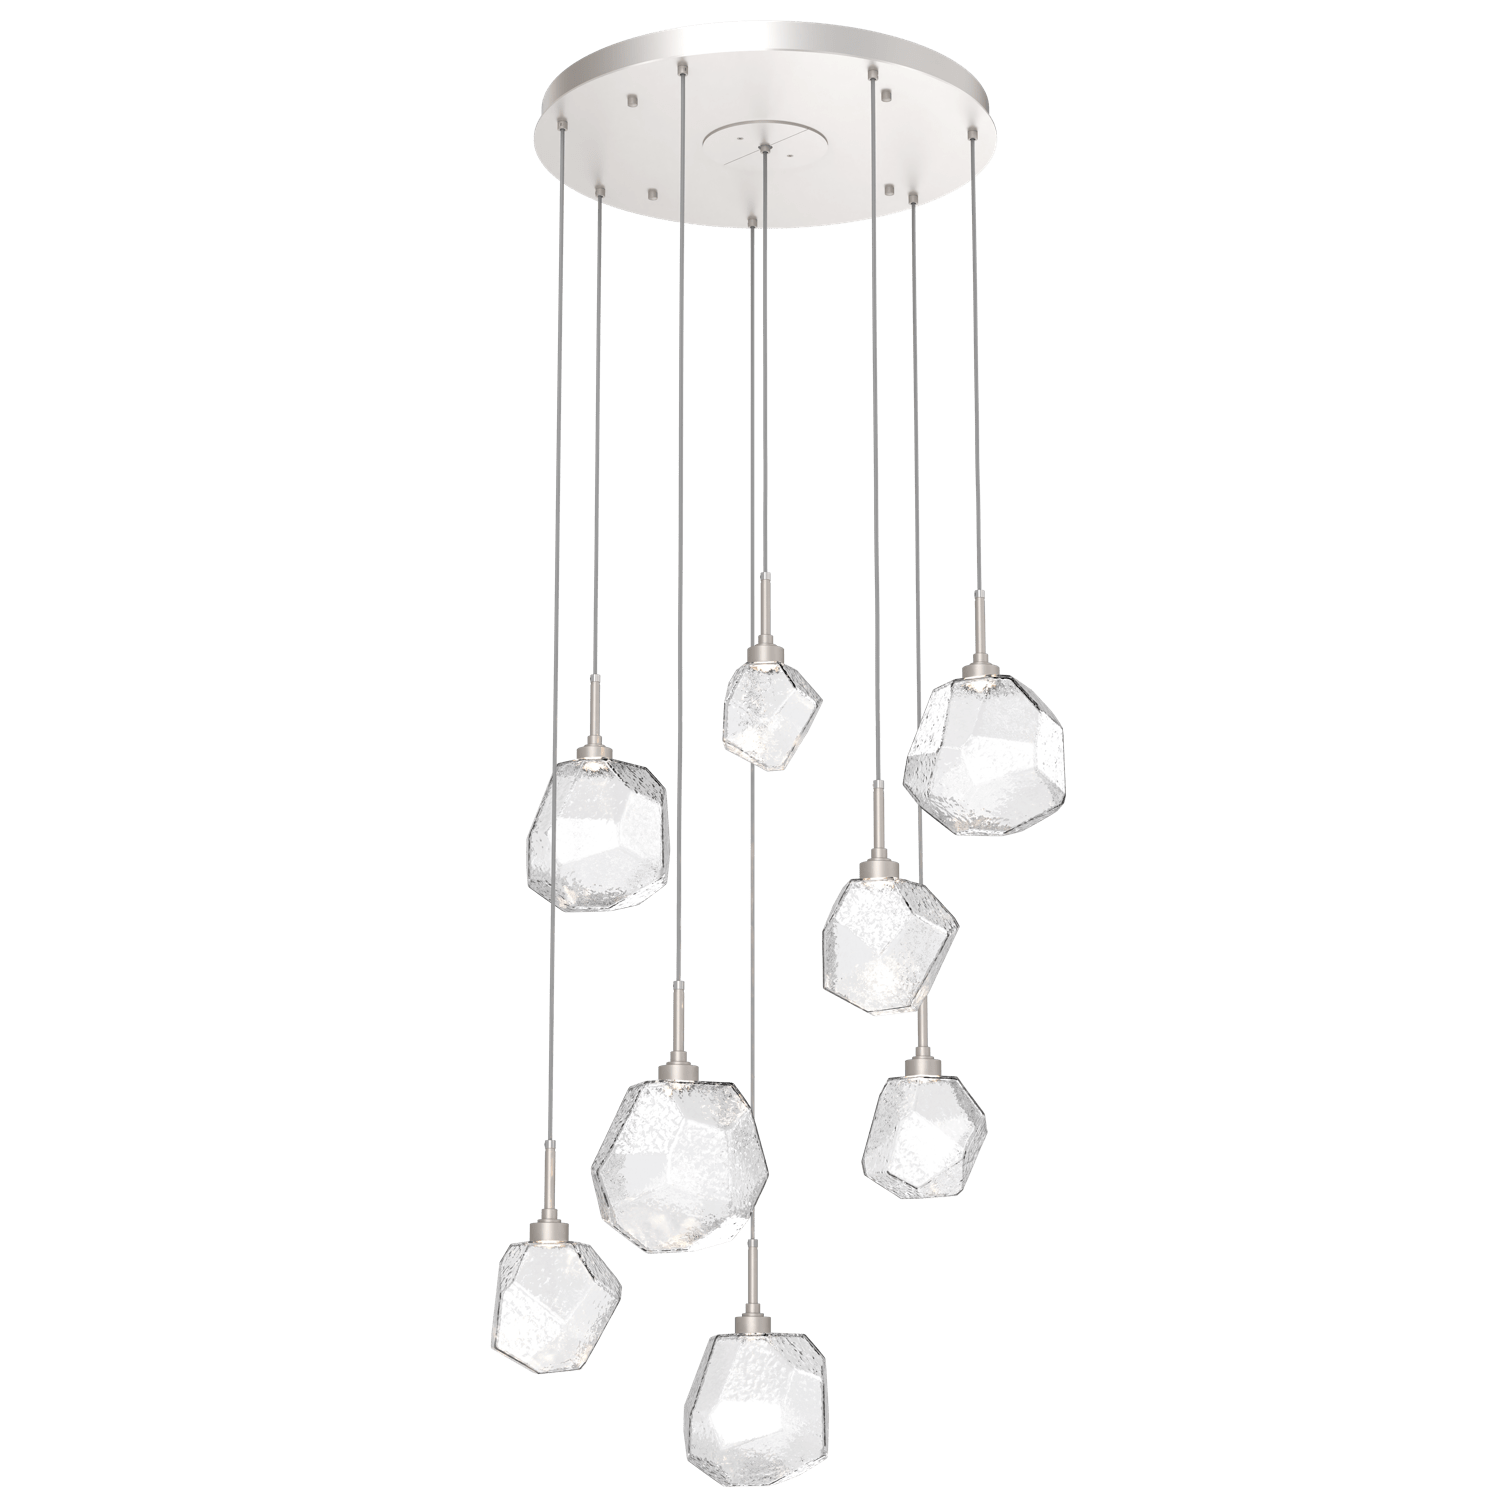 CHB0039-08-BS-C-Hammerton-Studio-Gem-8-light-round-pendant-chandelier-with-metallic-beige-silver-finish-and-clear-blown-glass-shades-and-LED-lamping